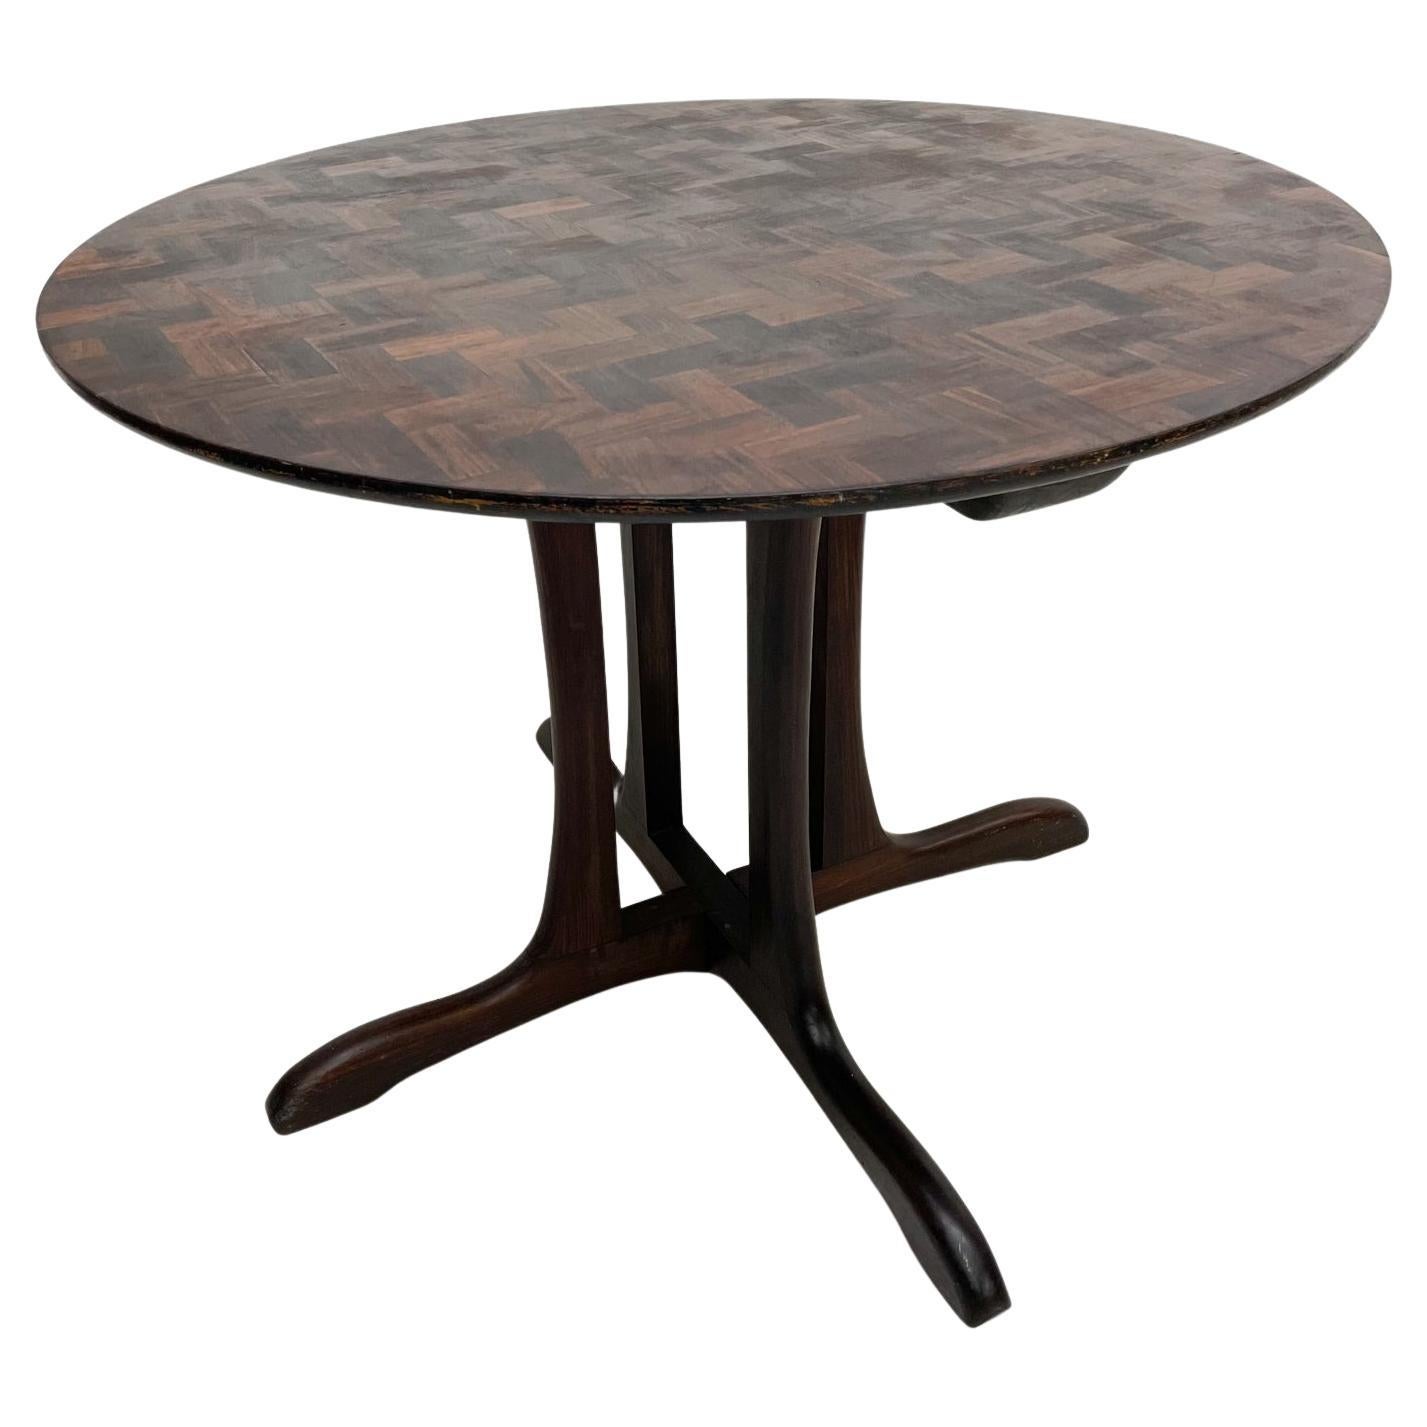 Round Dining TABLE exquisite exotic cocobolo wood marquetry designed by Don S Shoemaker Mexico 1960s
Shoemaker's Sling collection Mesa Redonda F12 produced by Señal his workshop.
Retains original maker label, Señal .
Measures: 39.25 diameter x